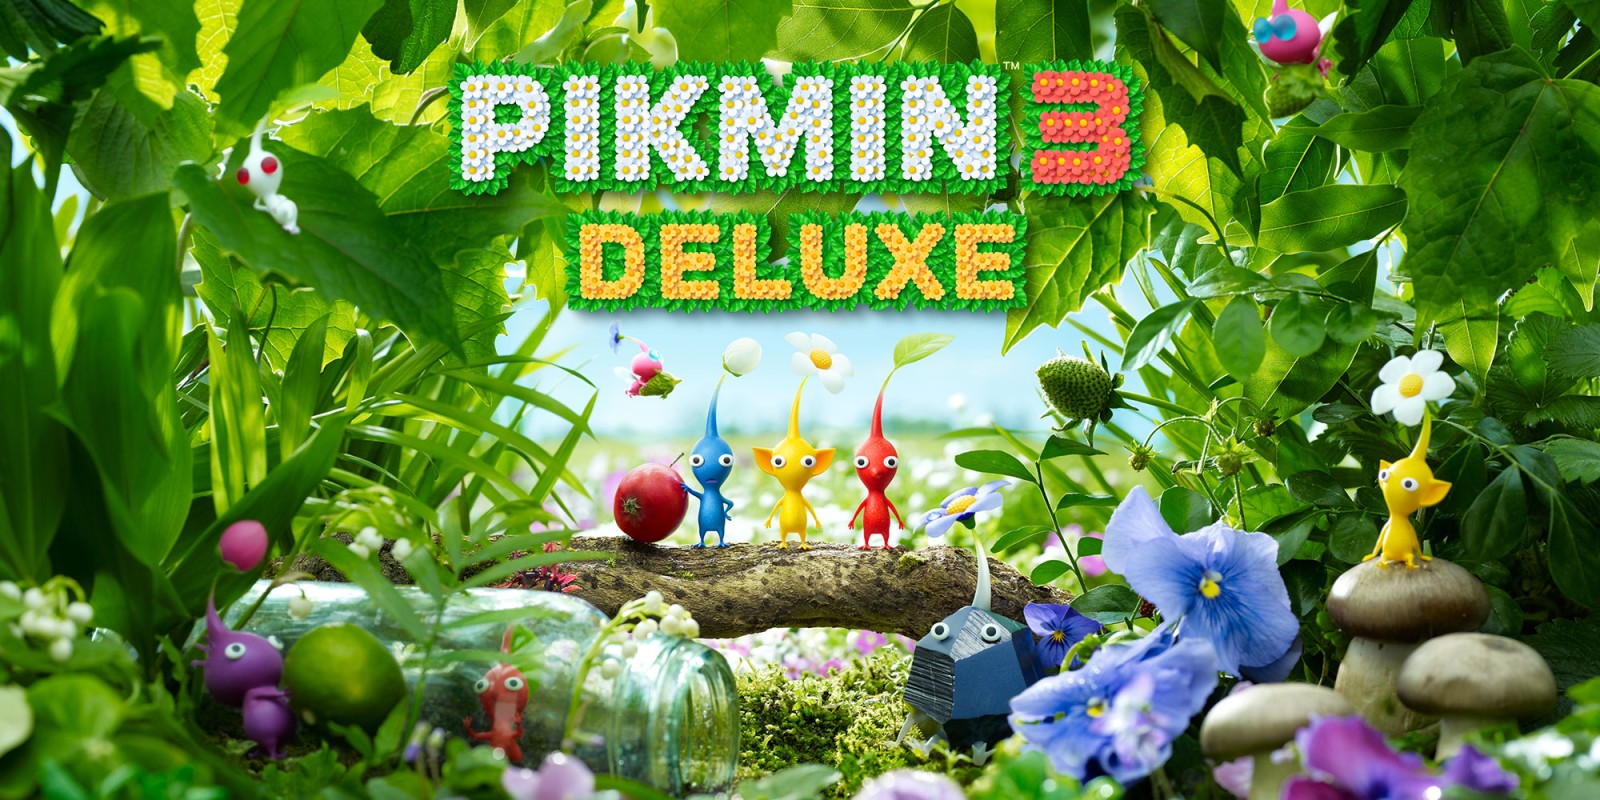 Pikmin 3 Deluxe – A Very Juicy Upgrade